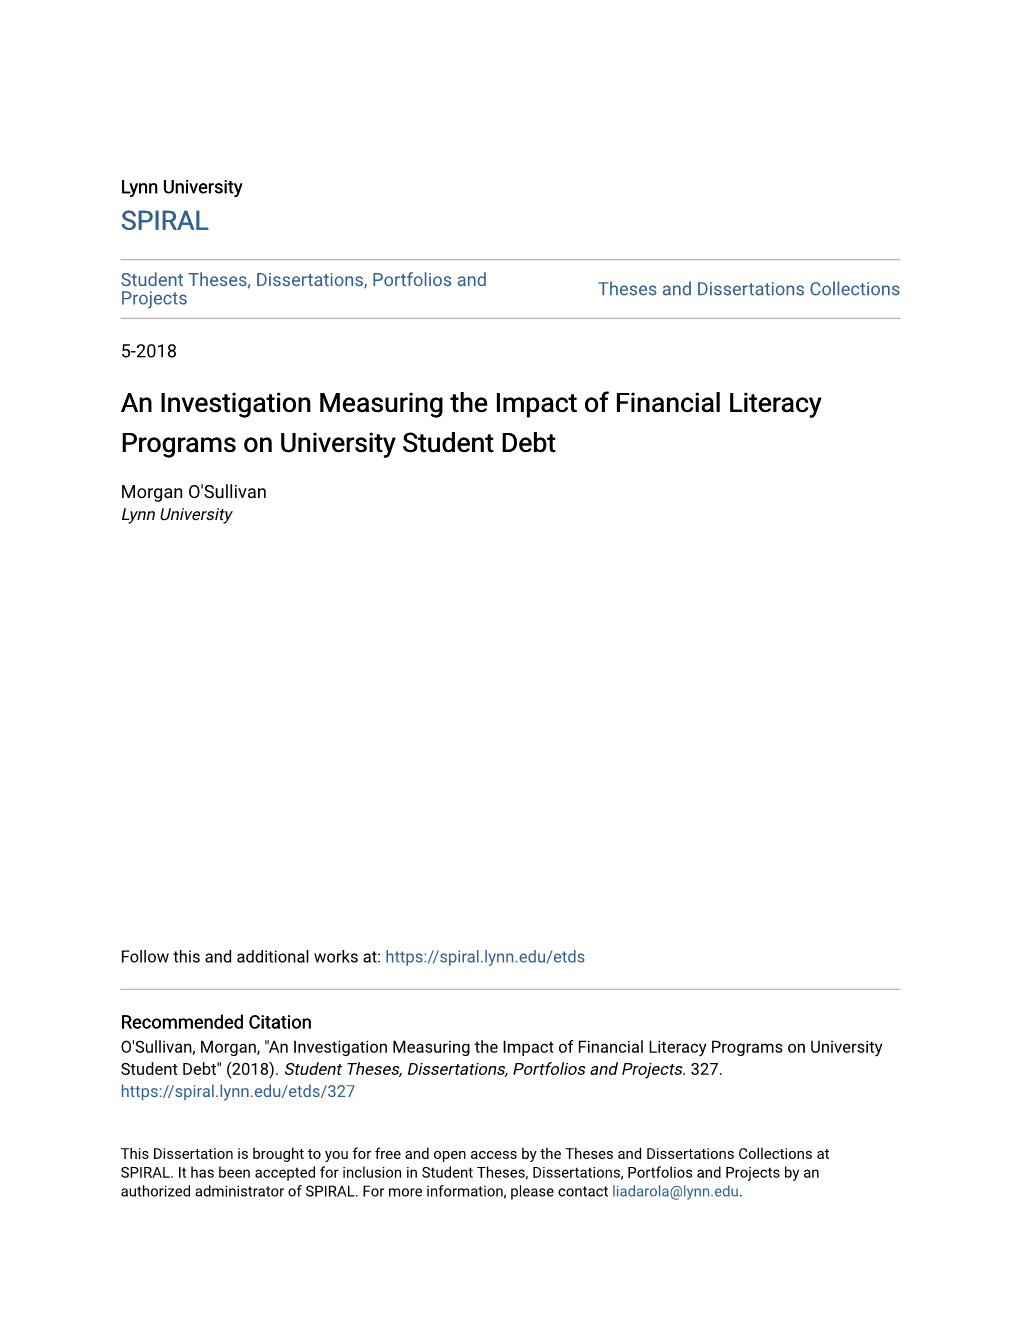 An Investigation Measuring the Impact of Financial Literacy Programs on University Student Debt